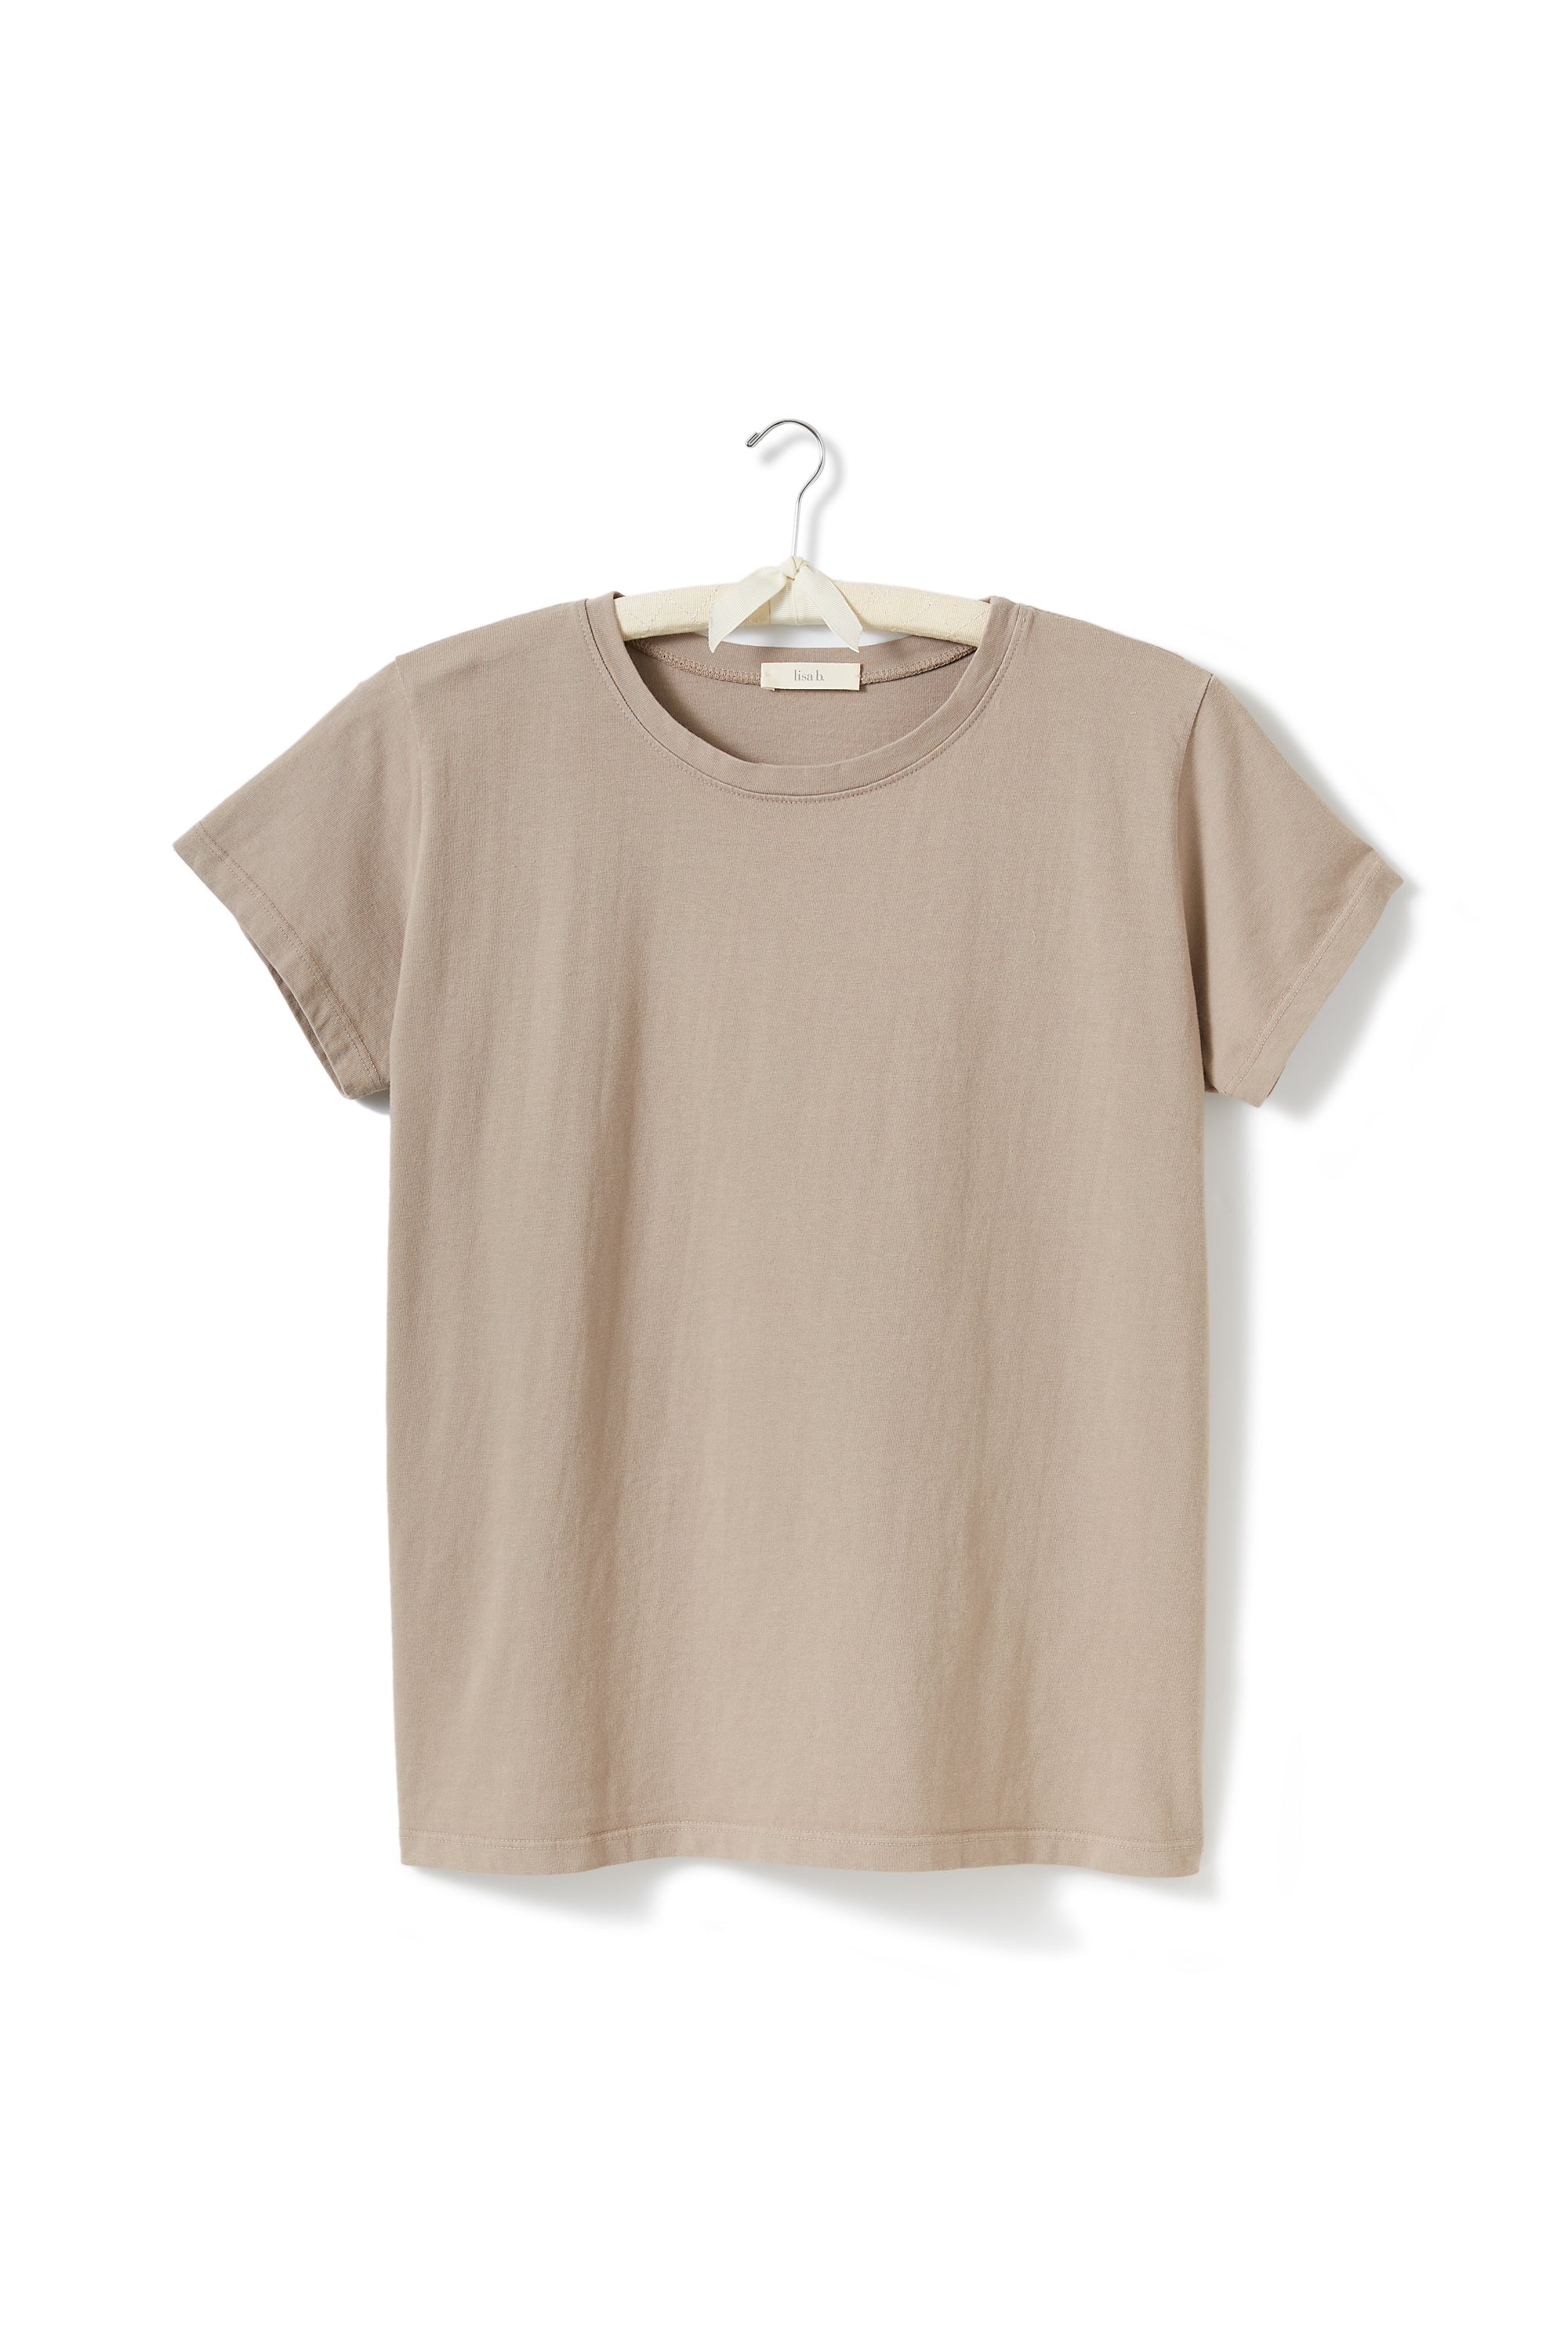 short sleeve relaxed crew neck tee shirt Cotton Knits lisa b. clay x-small (0-2) 